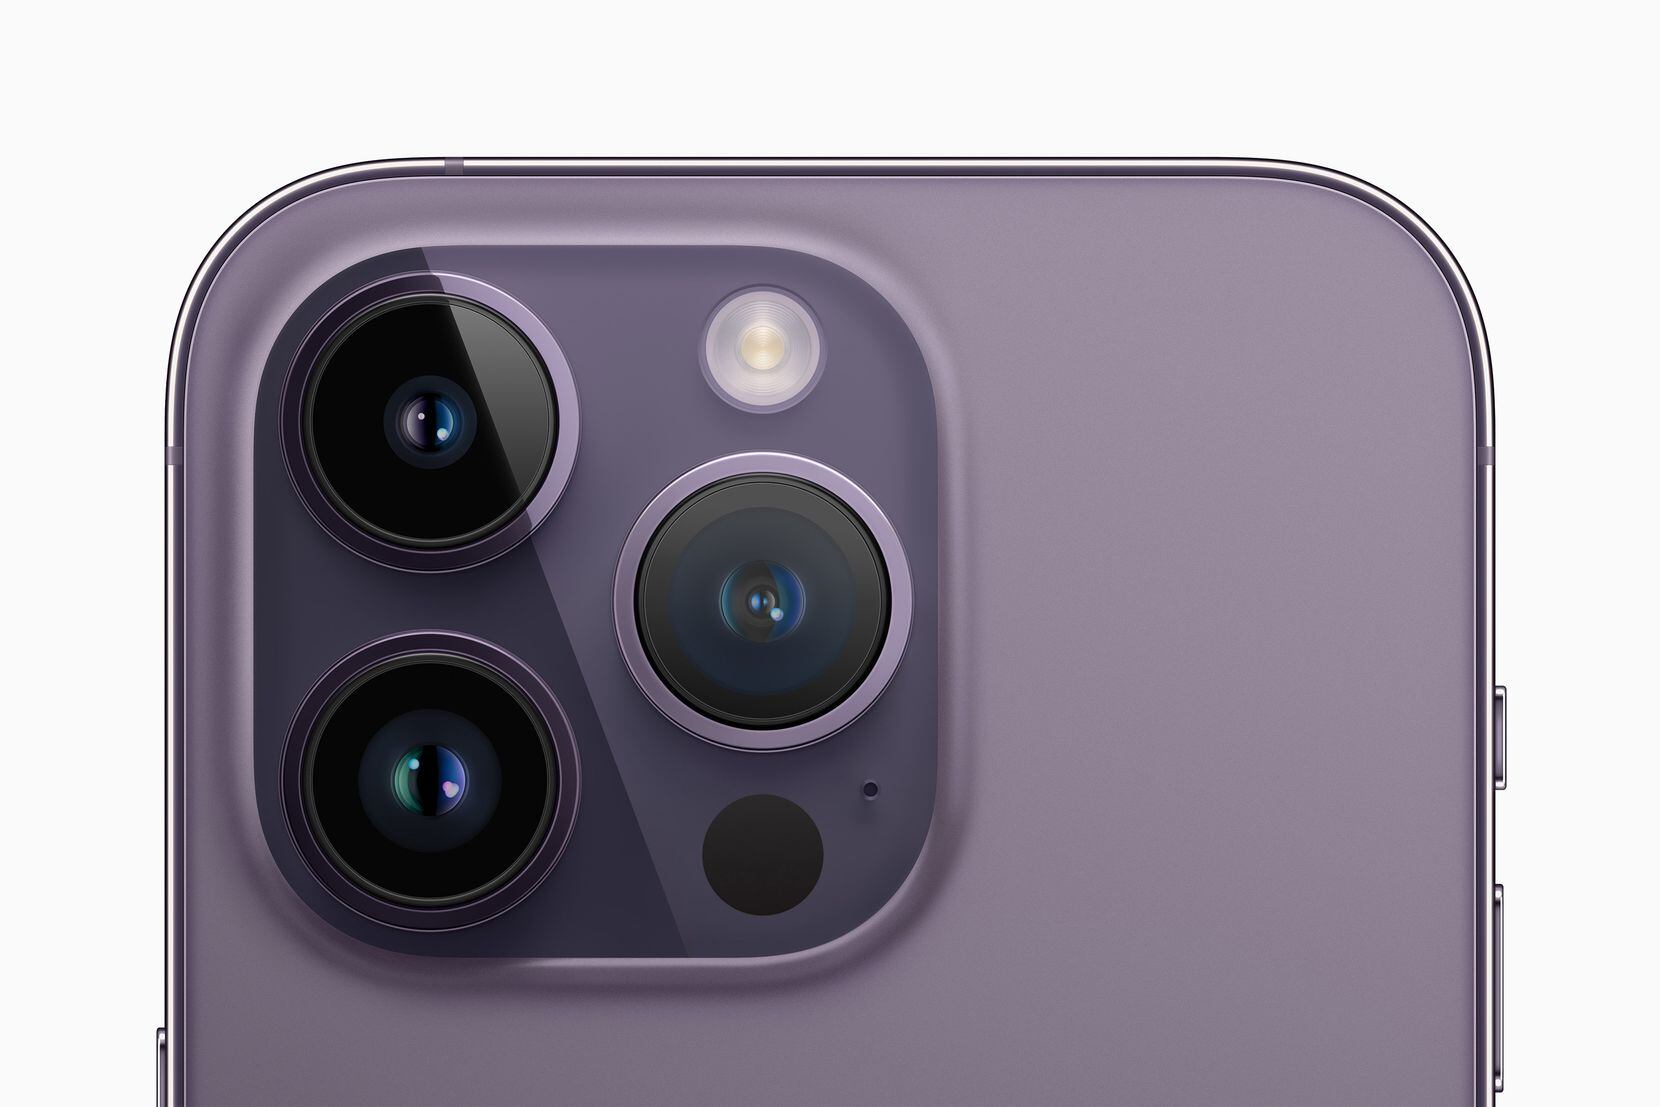 The main camera of the Apple iPhone 14 Pro has a 24 millimeter wide-angle lens with...